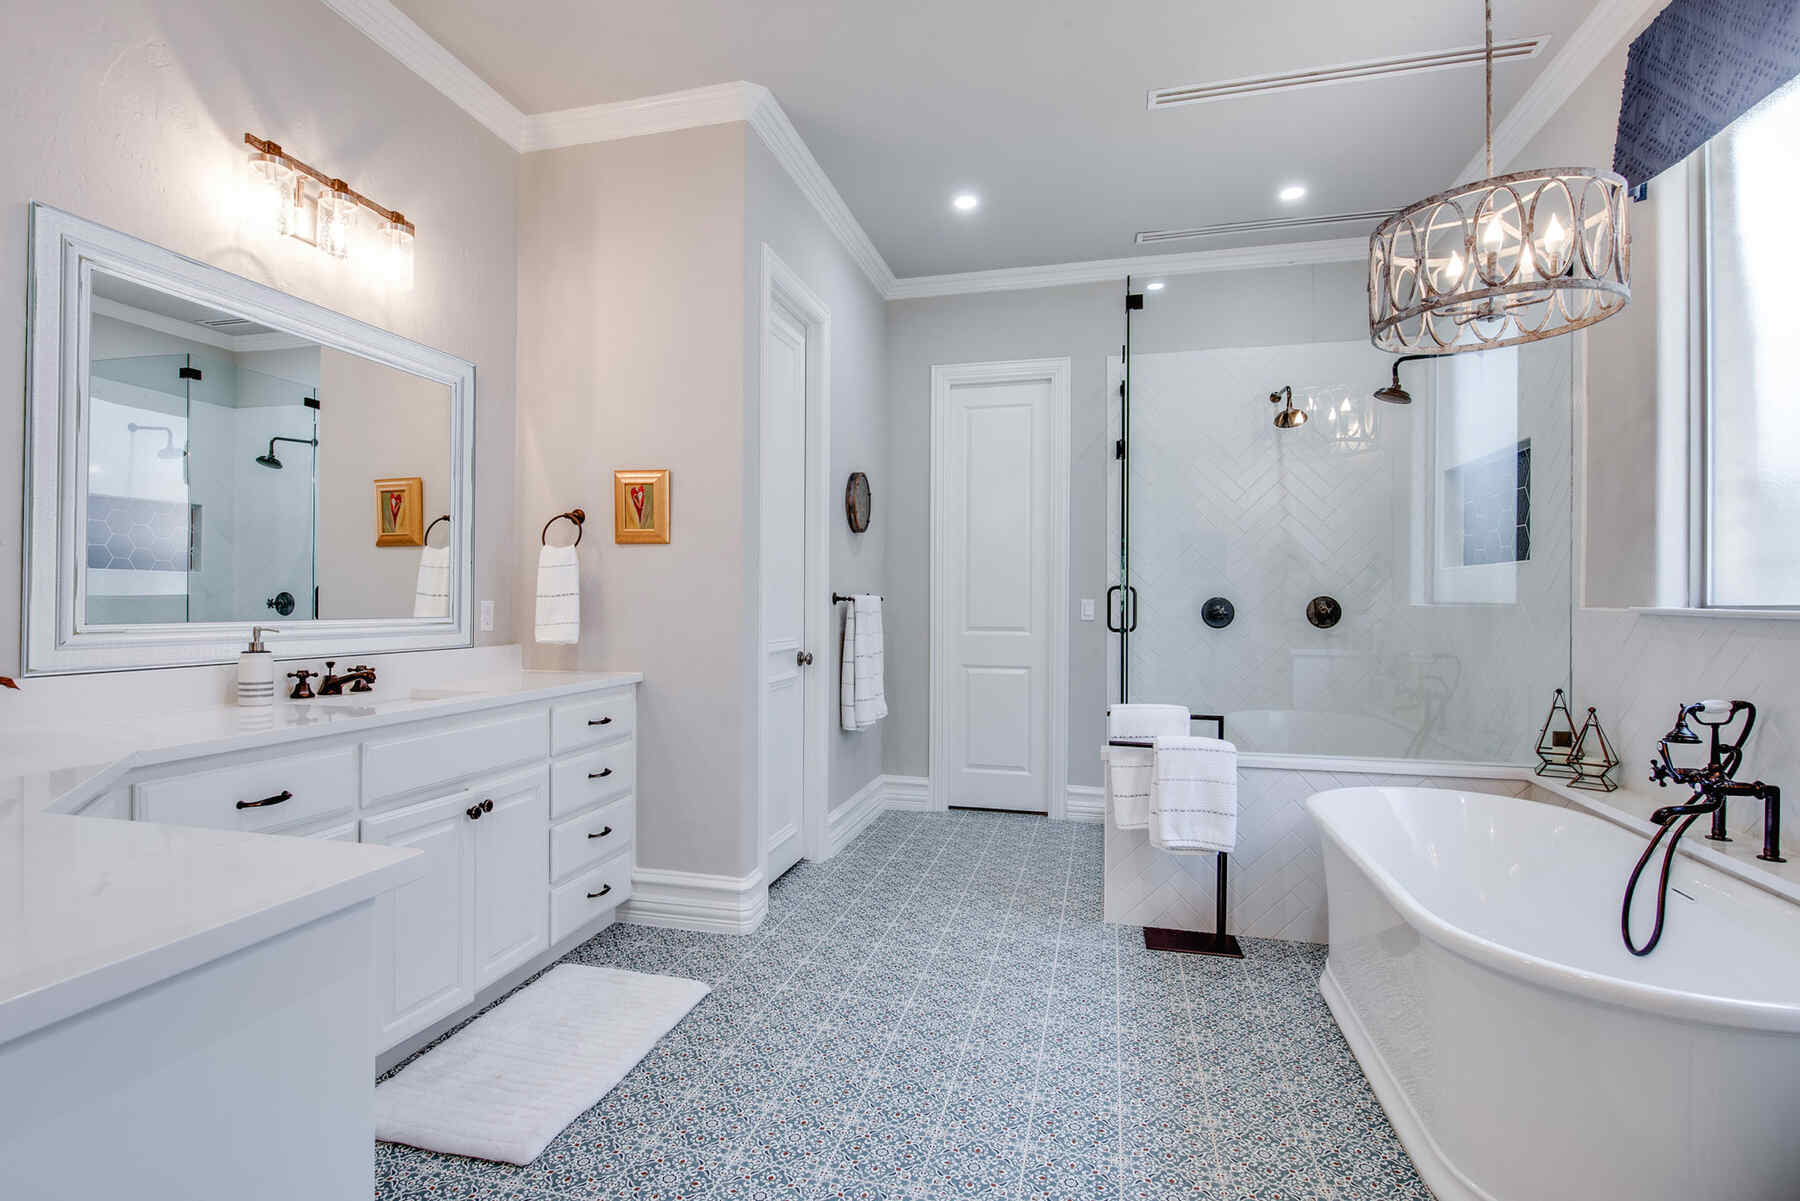 Bathroom with white furnishing and low hanging light fixture